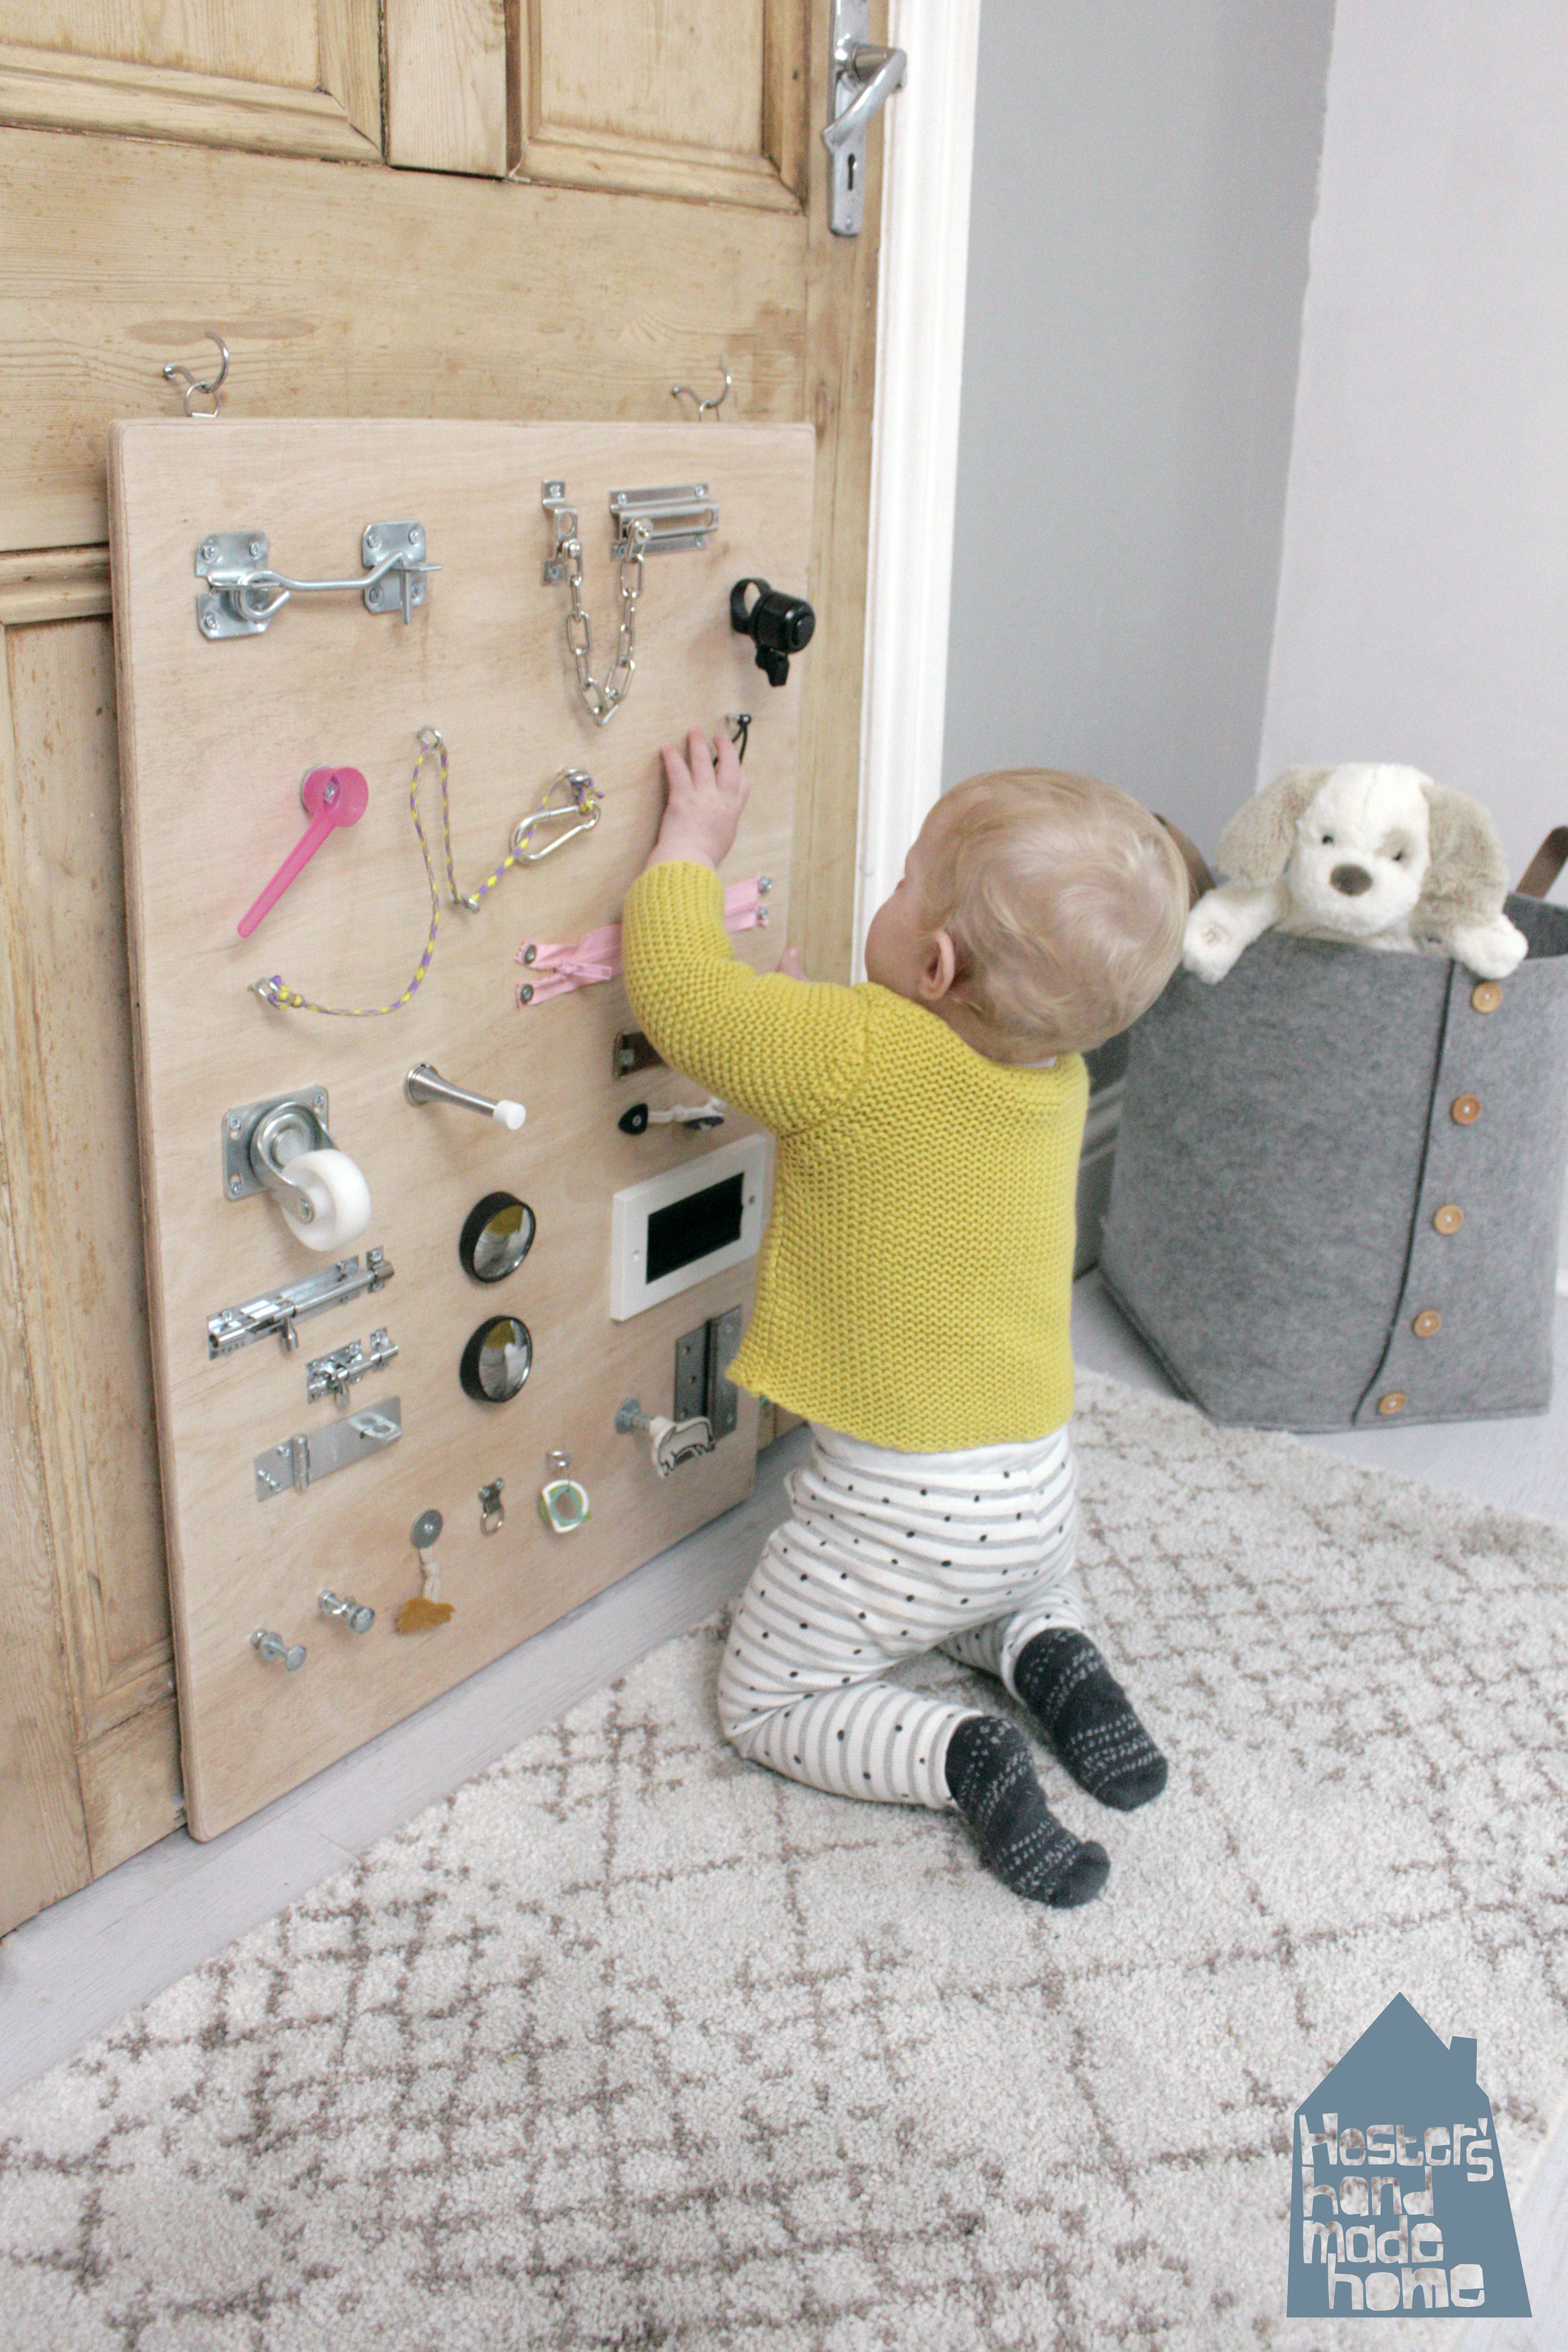 How to make a baby busy board — Hester's Handmade Home